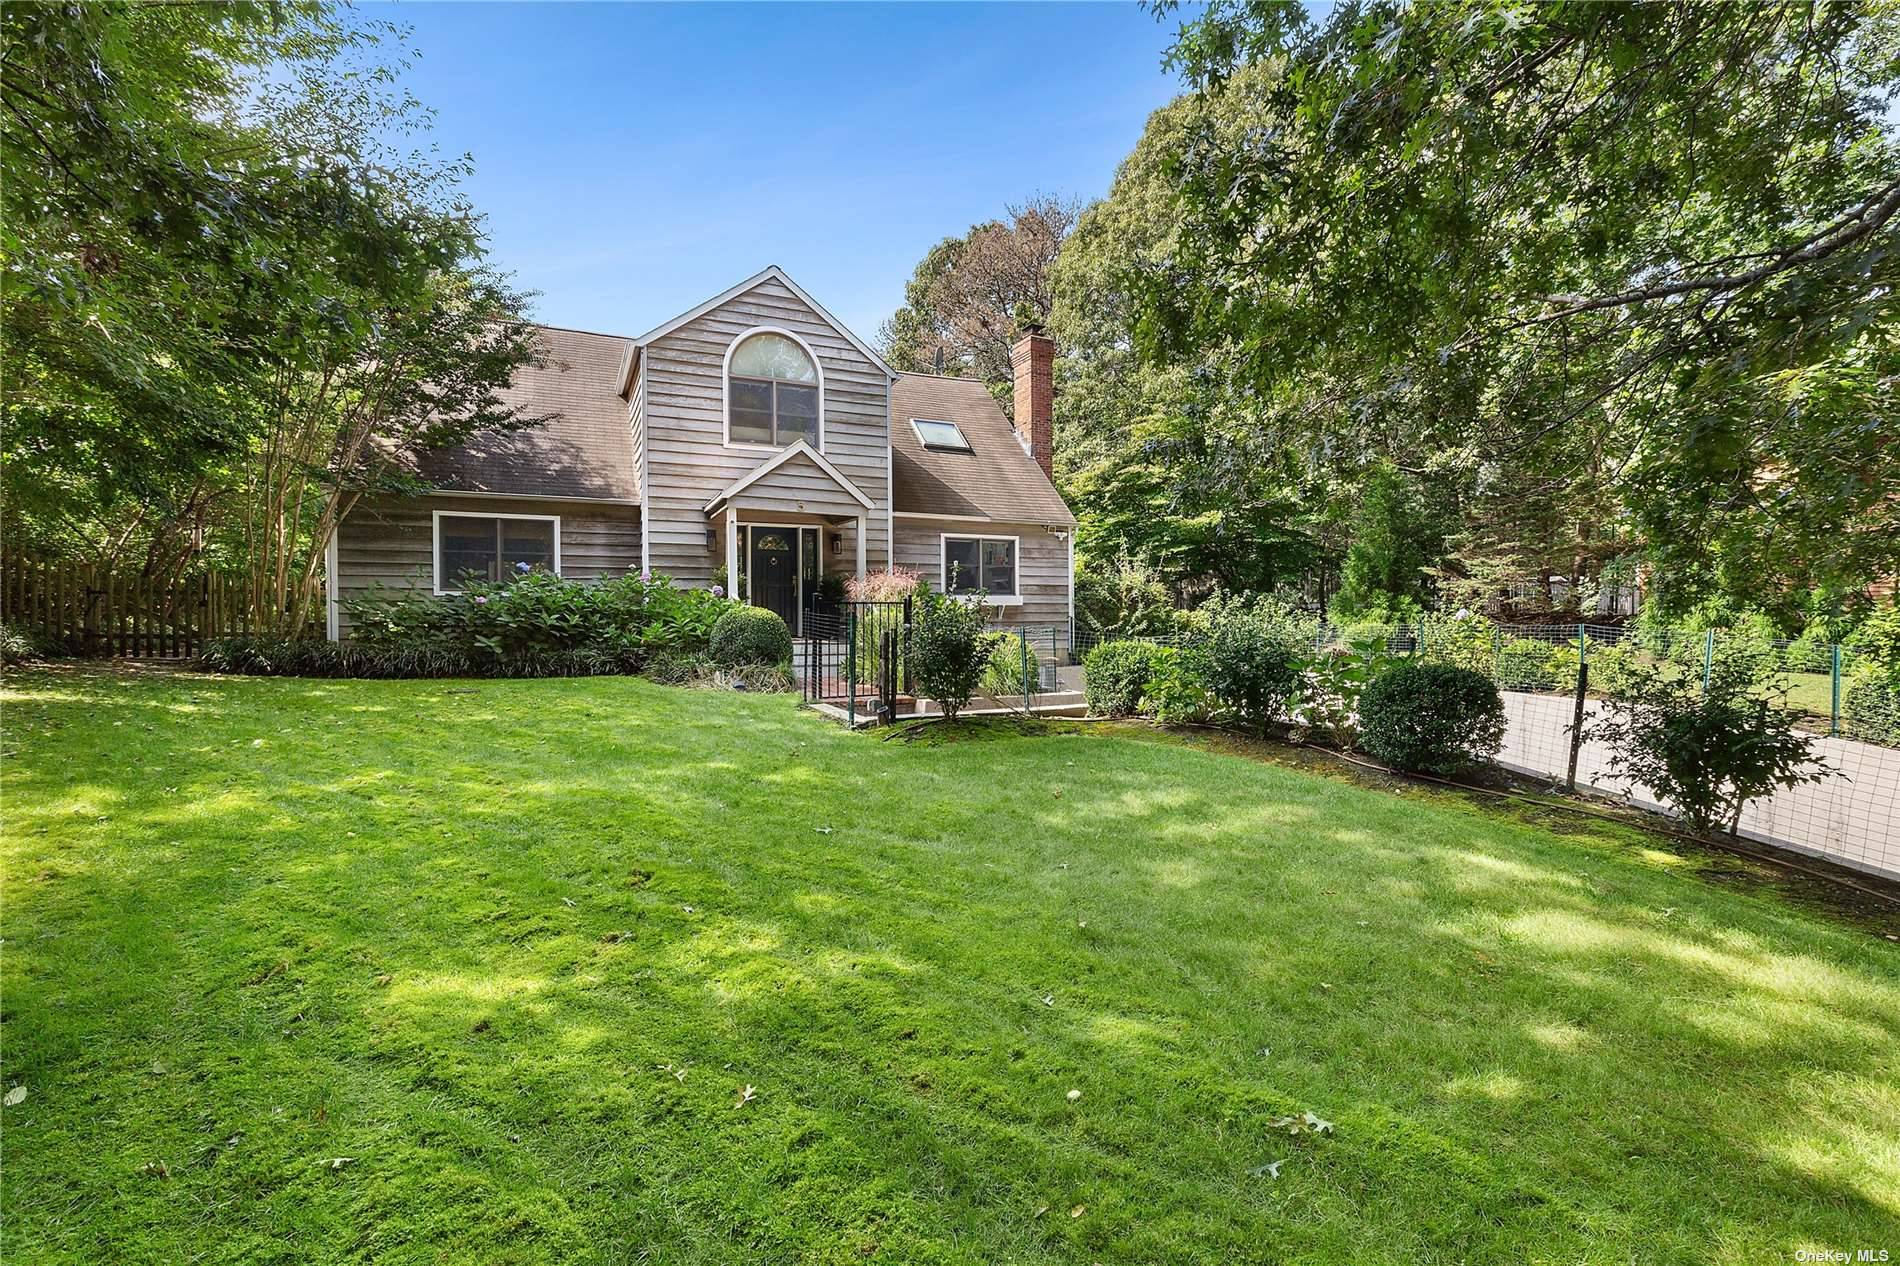 Exceptional residence located in Northwest Woods, just three miles from East Hampton Village, this chic, renovated four bedroom, three bathroom home is a true gem.